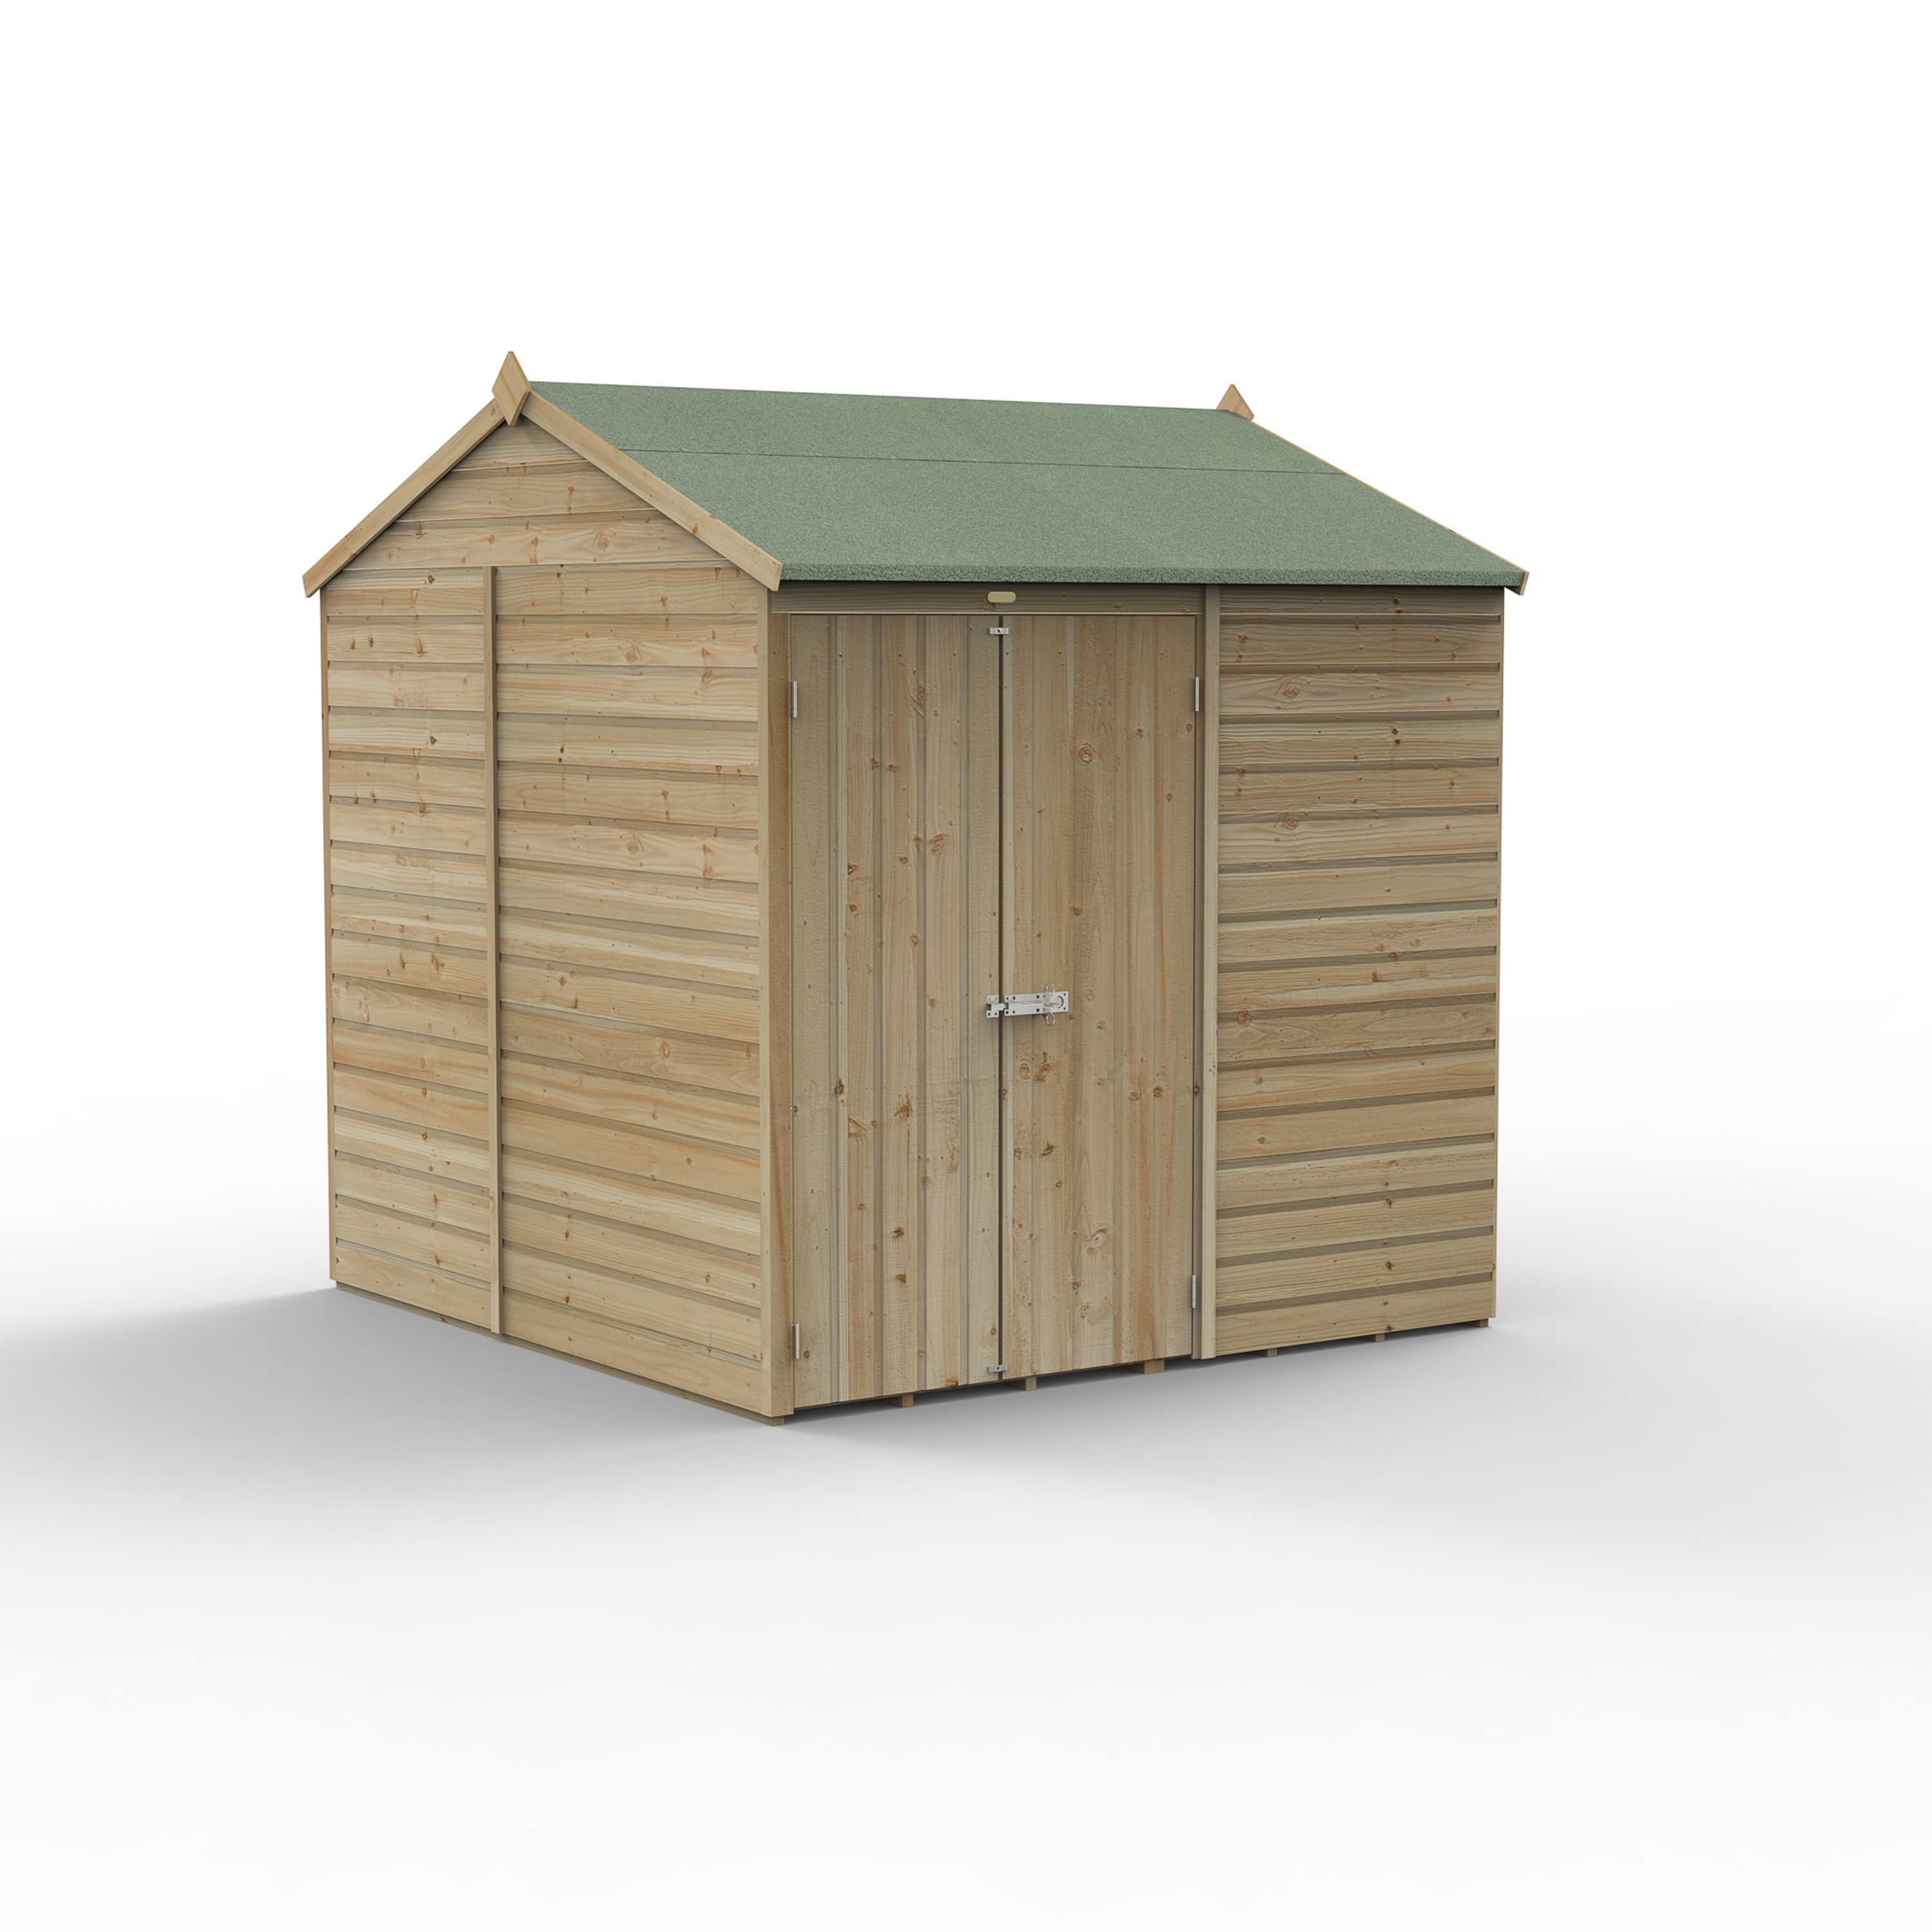 Forest Garden Beckwood 7x7 ft Reverse apex Natural timber Wooden 2 door Shed with floor - Assembly not required